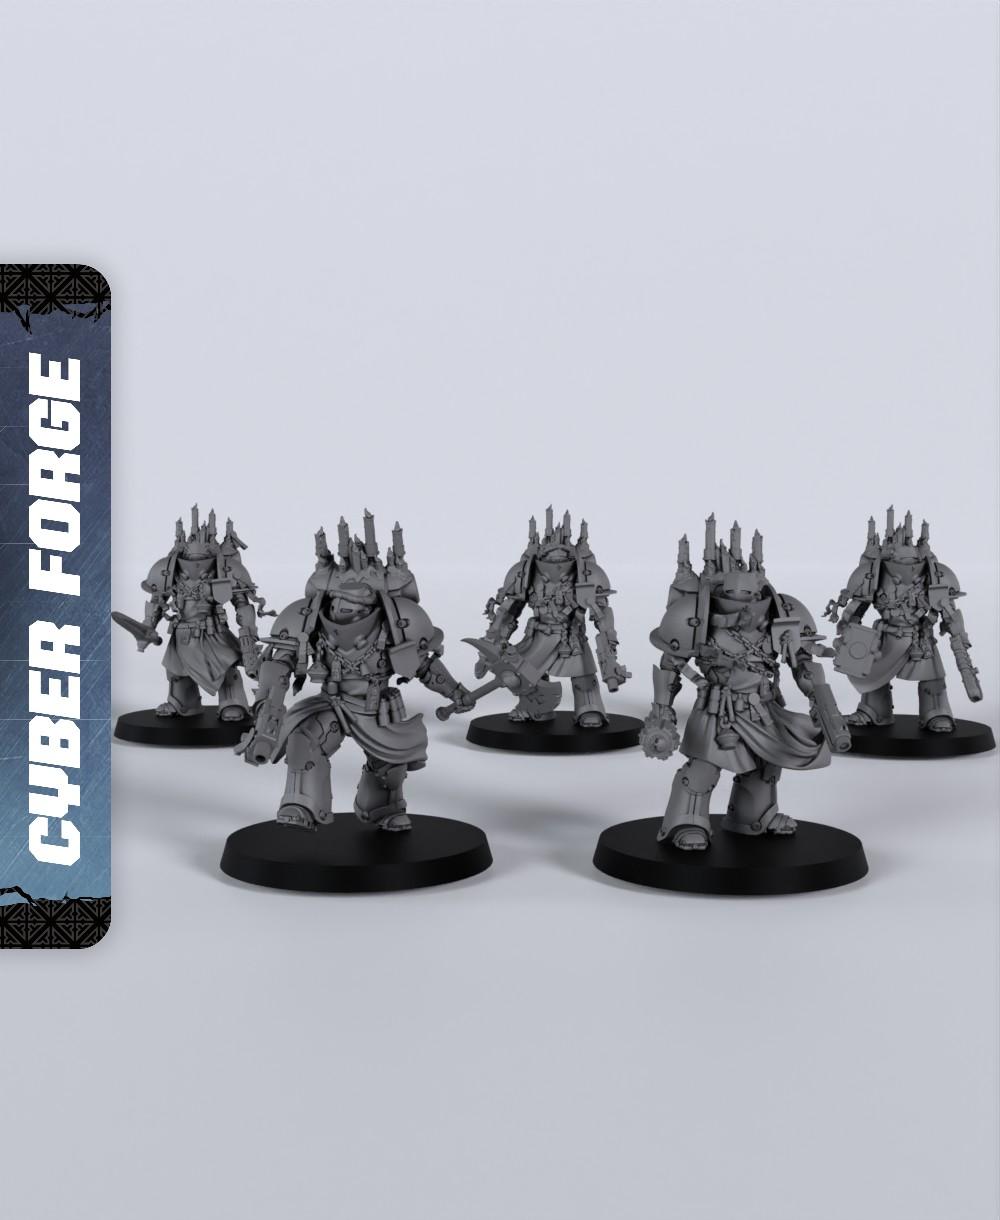 Black Knight Brothers - With Free Cyberpunk Warhammer - 40k Sci-Fi Gift Ideas for RPG and Wargamers 3d model